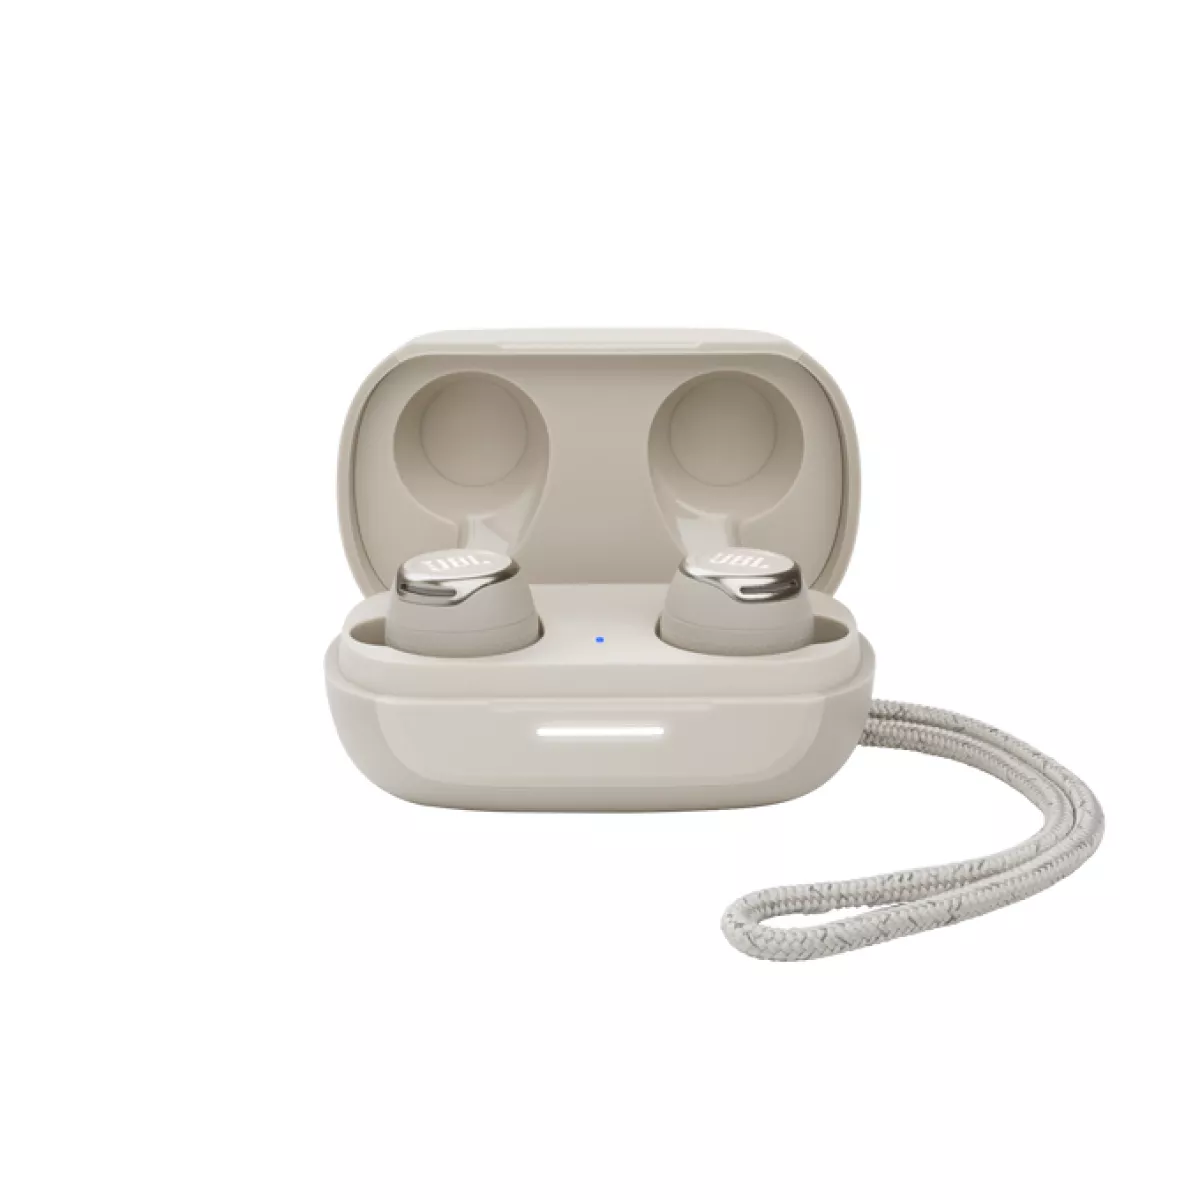 #3 - JBL -  Reflect Flow Pro+, True Wireless NC Sports earbuds with Adaptive ANC, IPX8, 10 hours battery, White